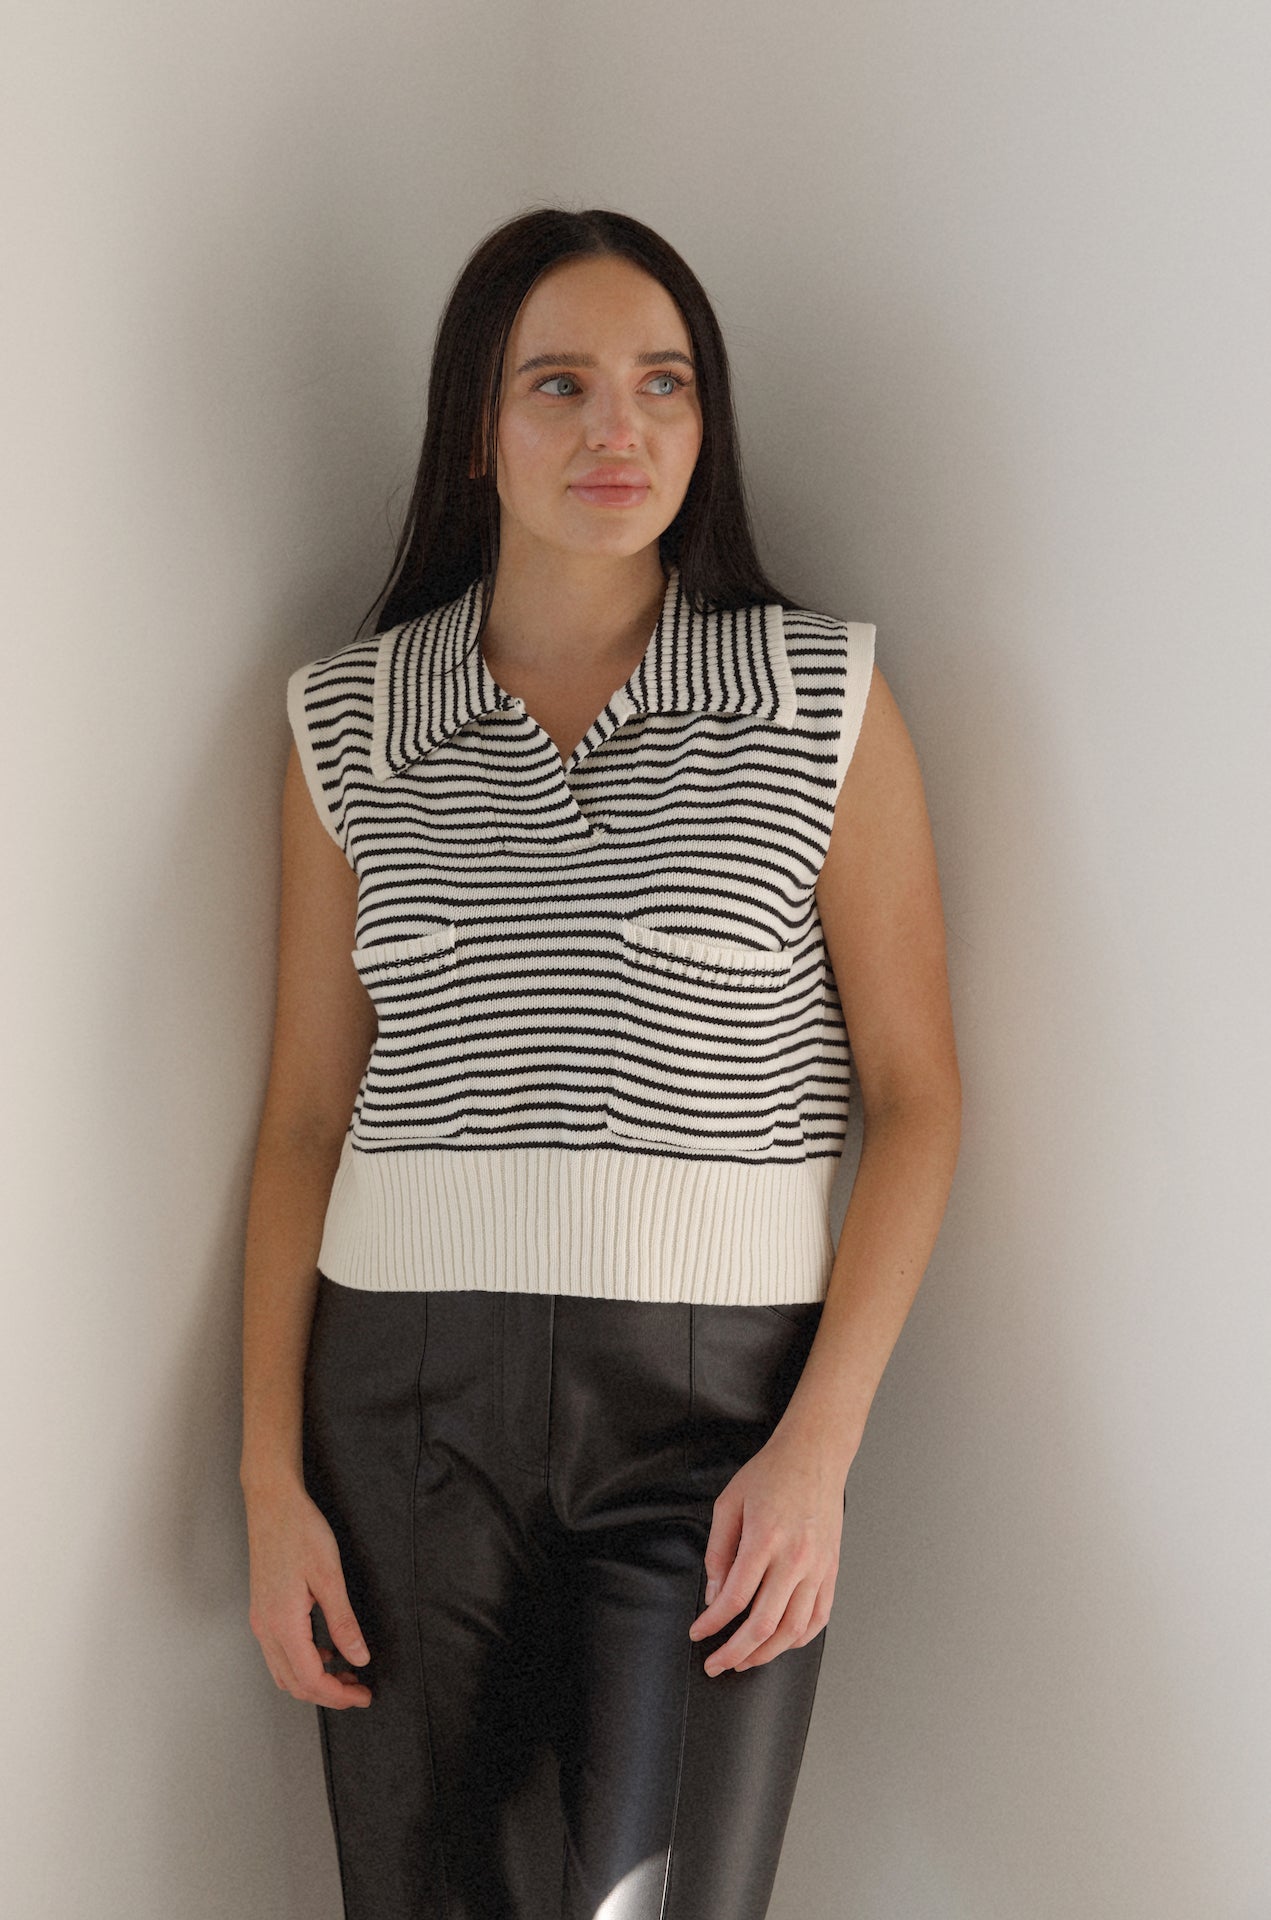 black and white striped sweater vest that is collared with pockets